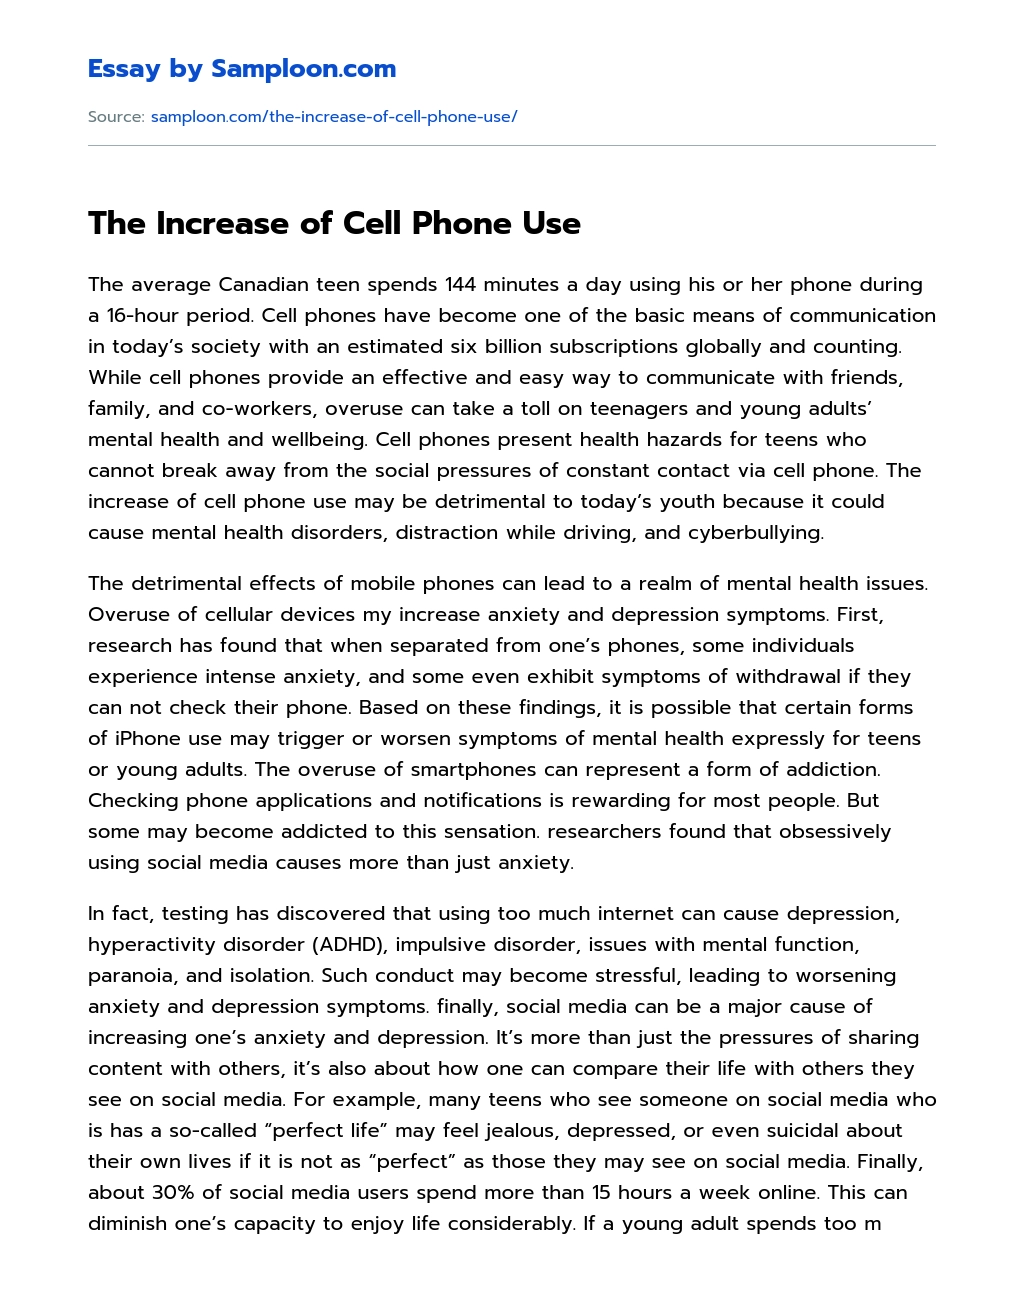 The Increase of Cell Phone Use essay